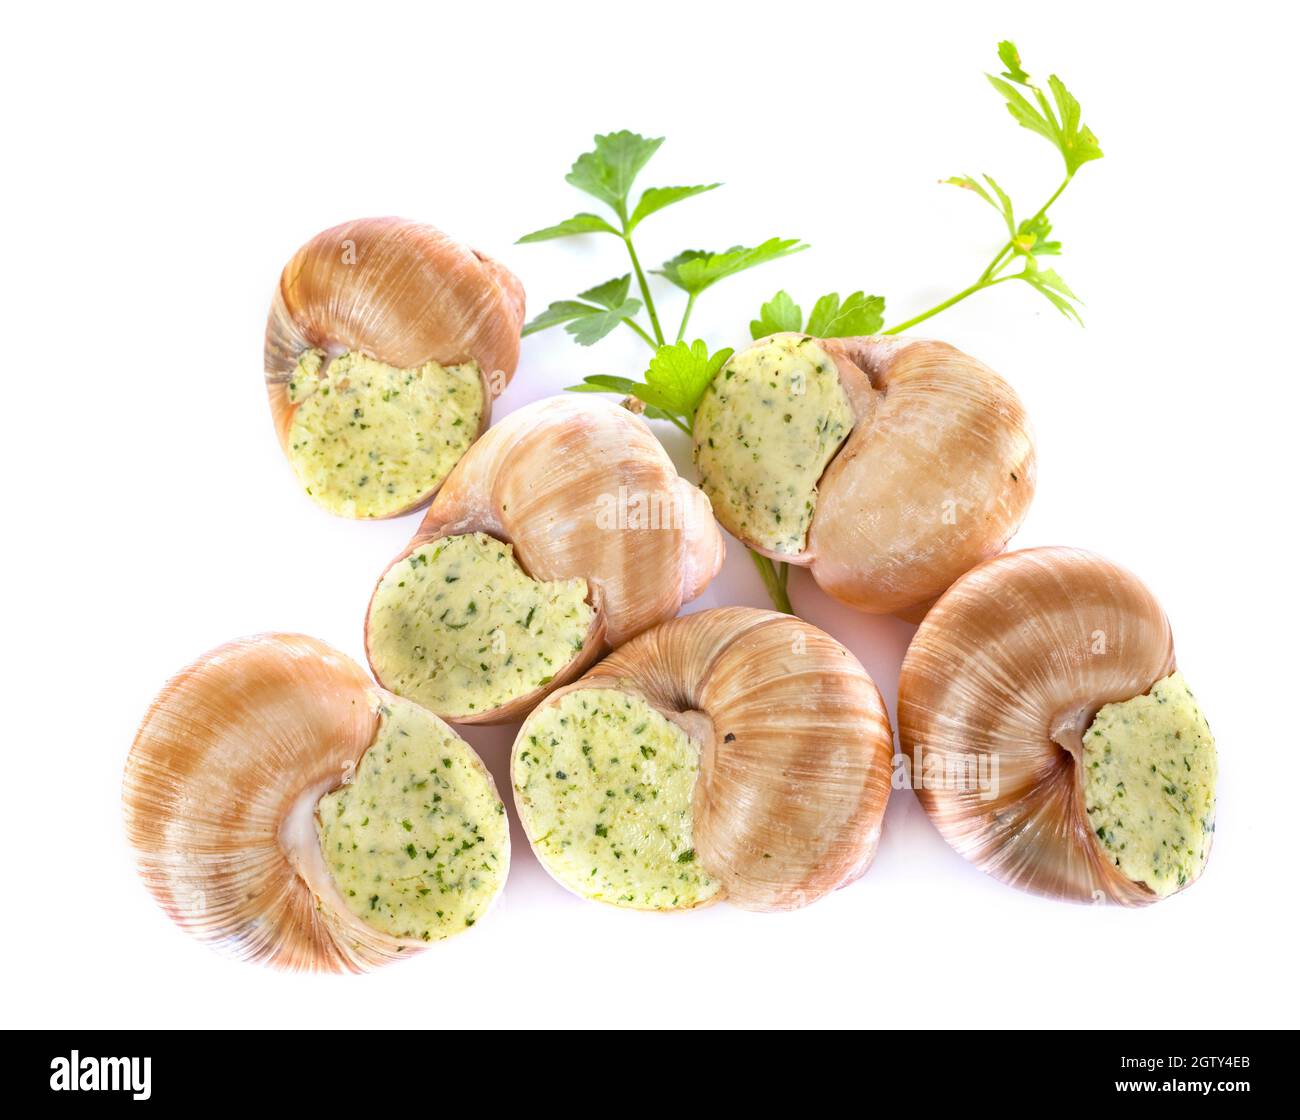 High Angle View Of Vegetables On White Background Stock Photo